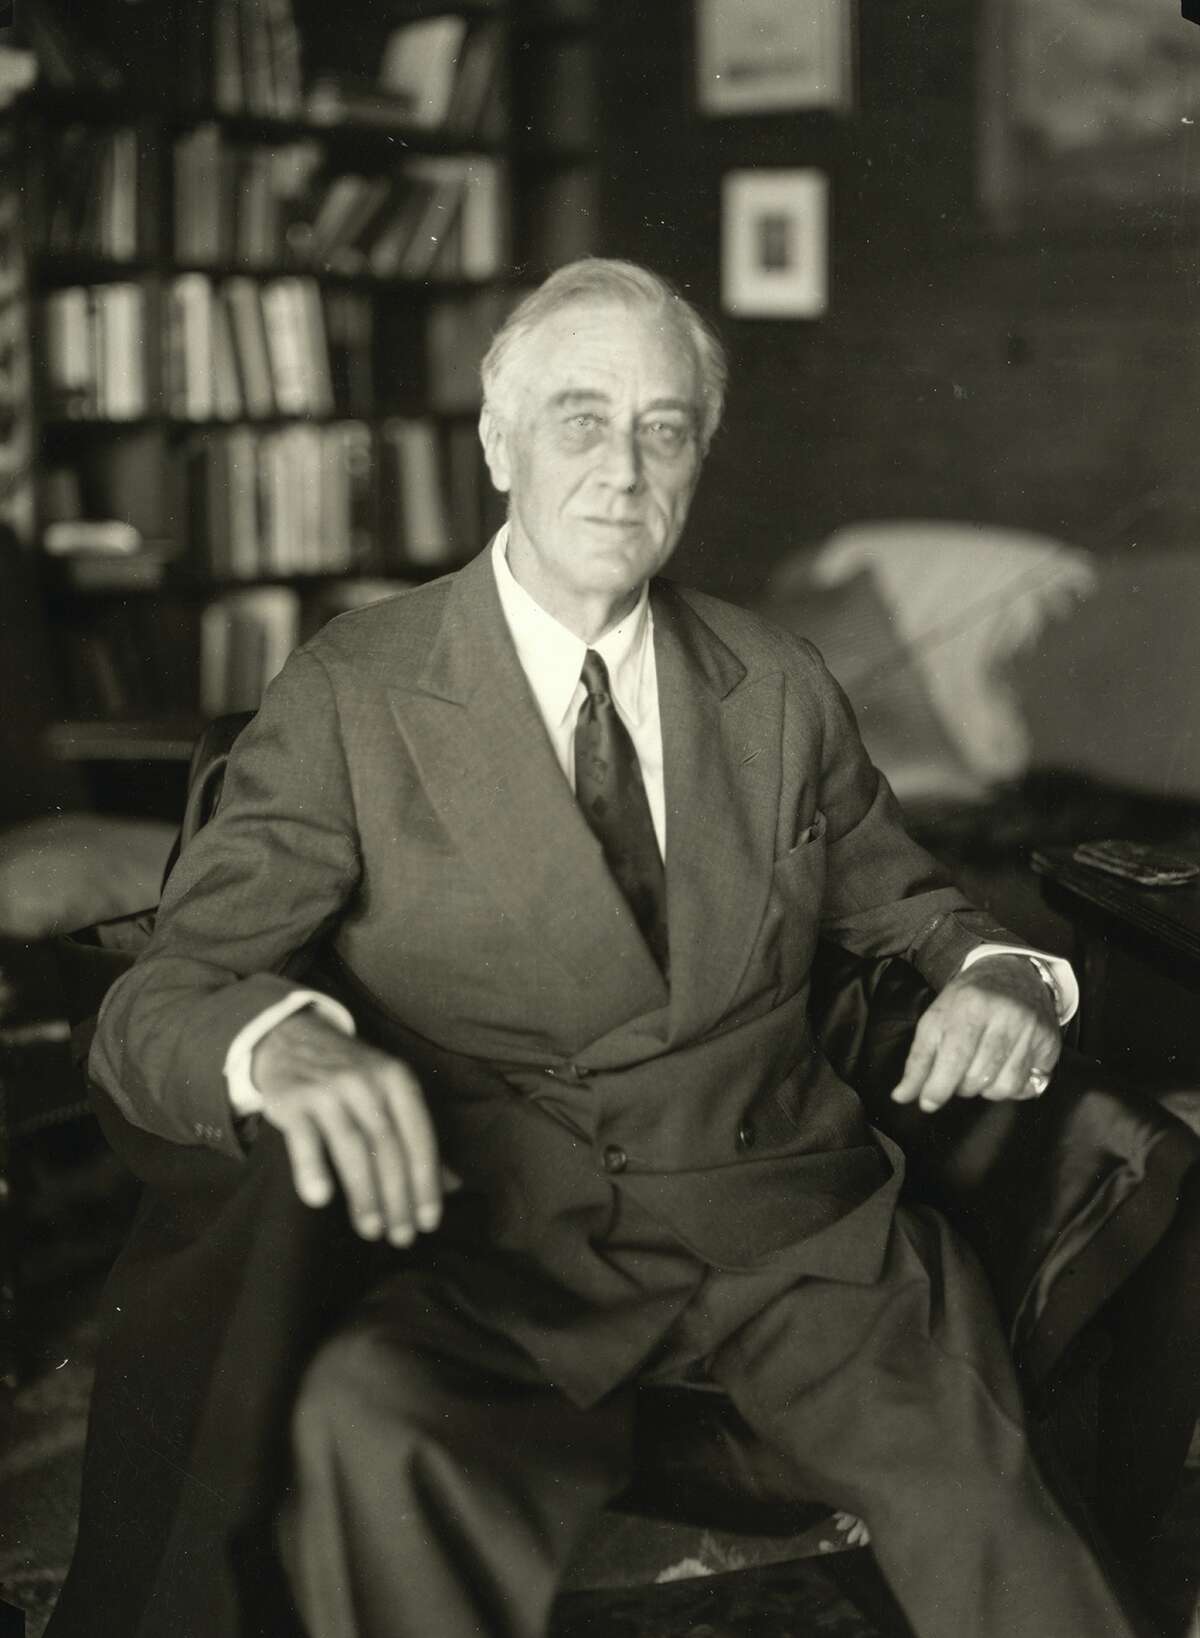 Last Photograph of Franklin D. Roosevelt, Warm Springs, Georgia, April 11, 1945. This is the last photograph of Franklin Roosevelt. It was taken by photographer Nicholas Robbins at the President's cottage at Warm Springs, Georgia on April 11, 1945. Robbins was an associate of artist Elizabeth Shoumatoff, who had come to Warm Springs in early April to paint FDR's portrait. Shoumatoff asked Robbins to take this photograph to assist her in her work. (Franklin D. Roosevelt Library Archives)